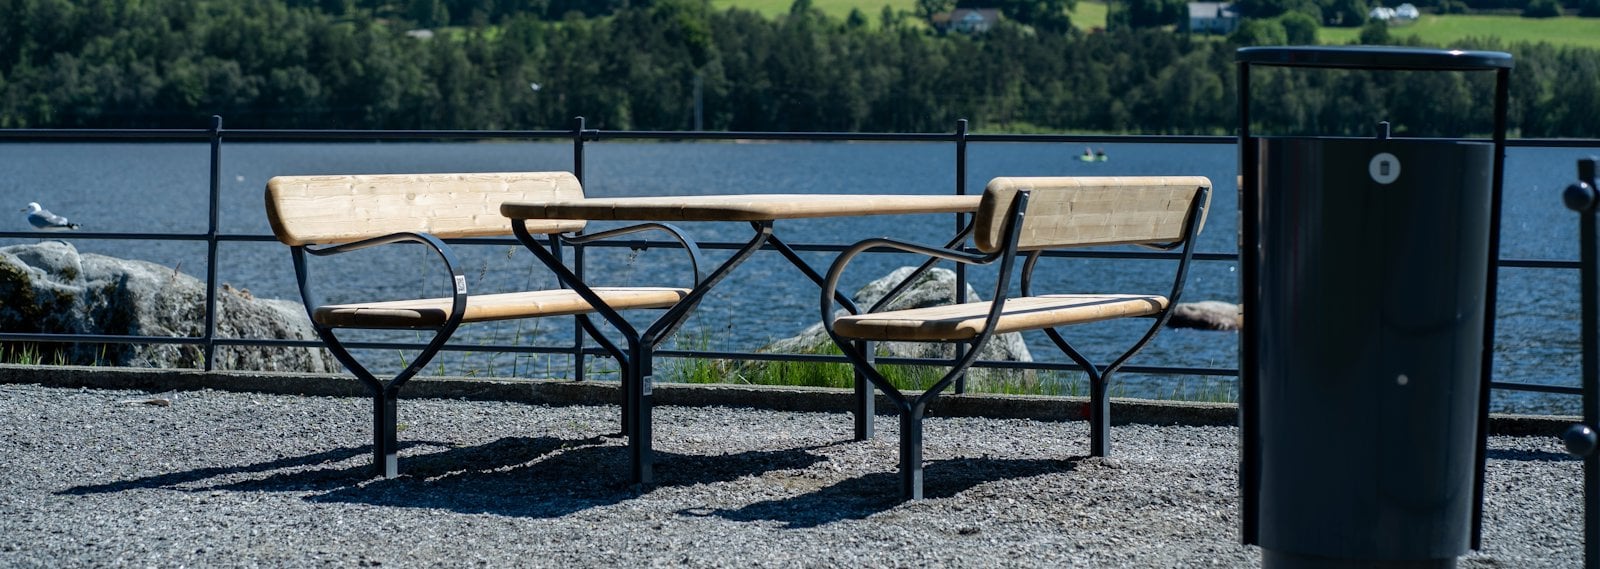 a picnic table and bench on a beach